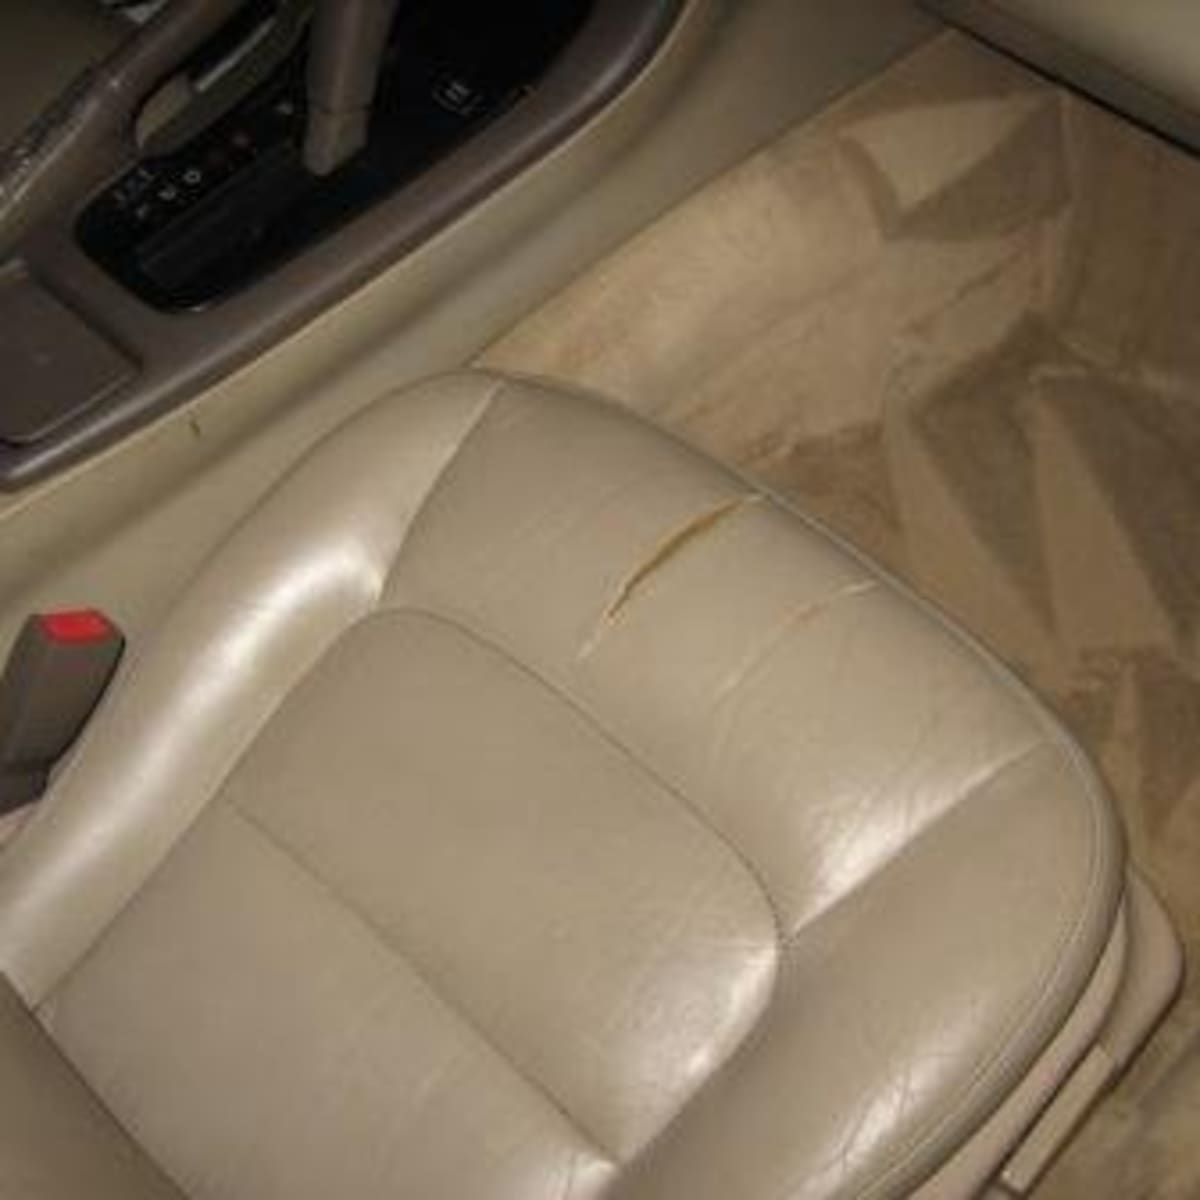 To Repair Leather And Vinyl Car Seats, How Much To Replace Car Seats With Leather